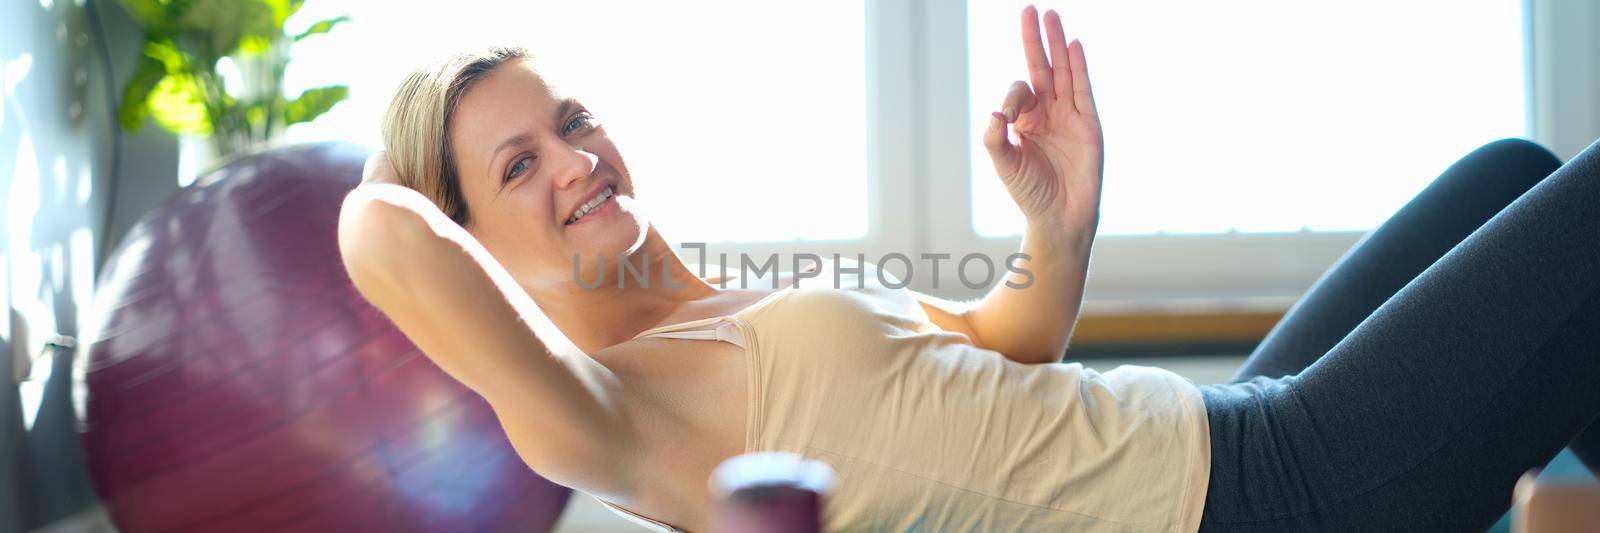 Smiling woman doing exercises on back roller. Recommended sports exercises for posture concept